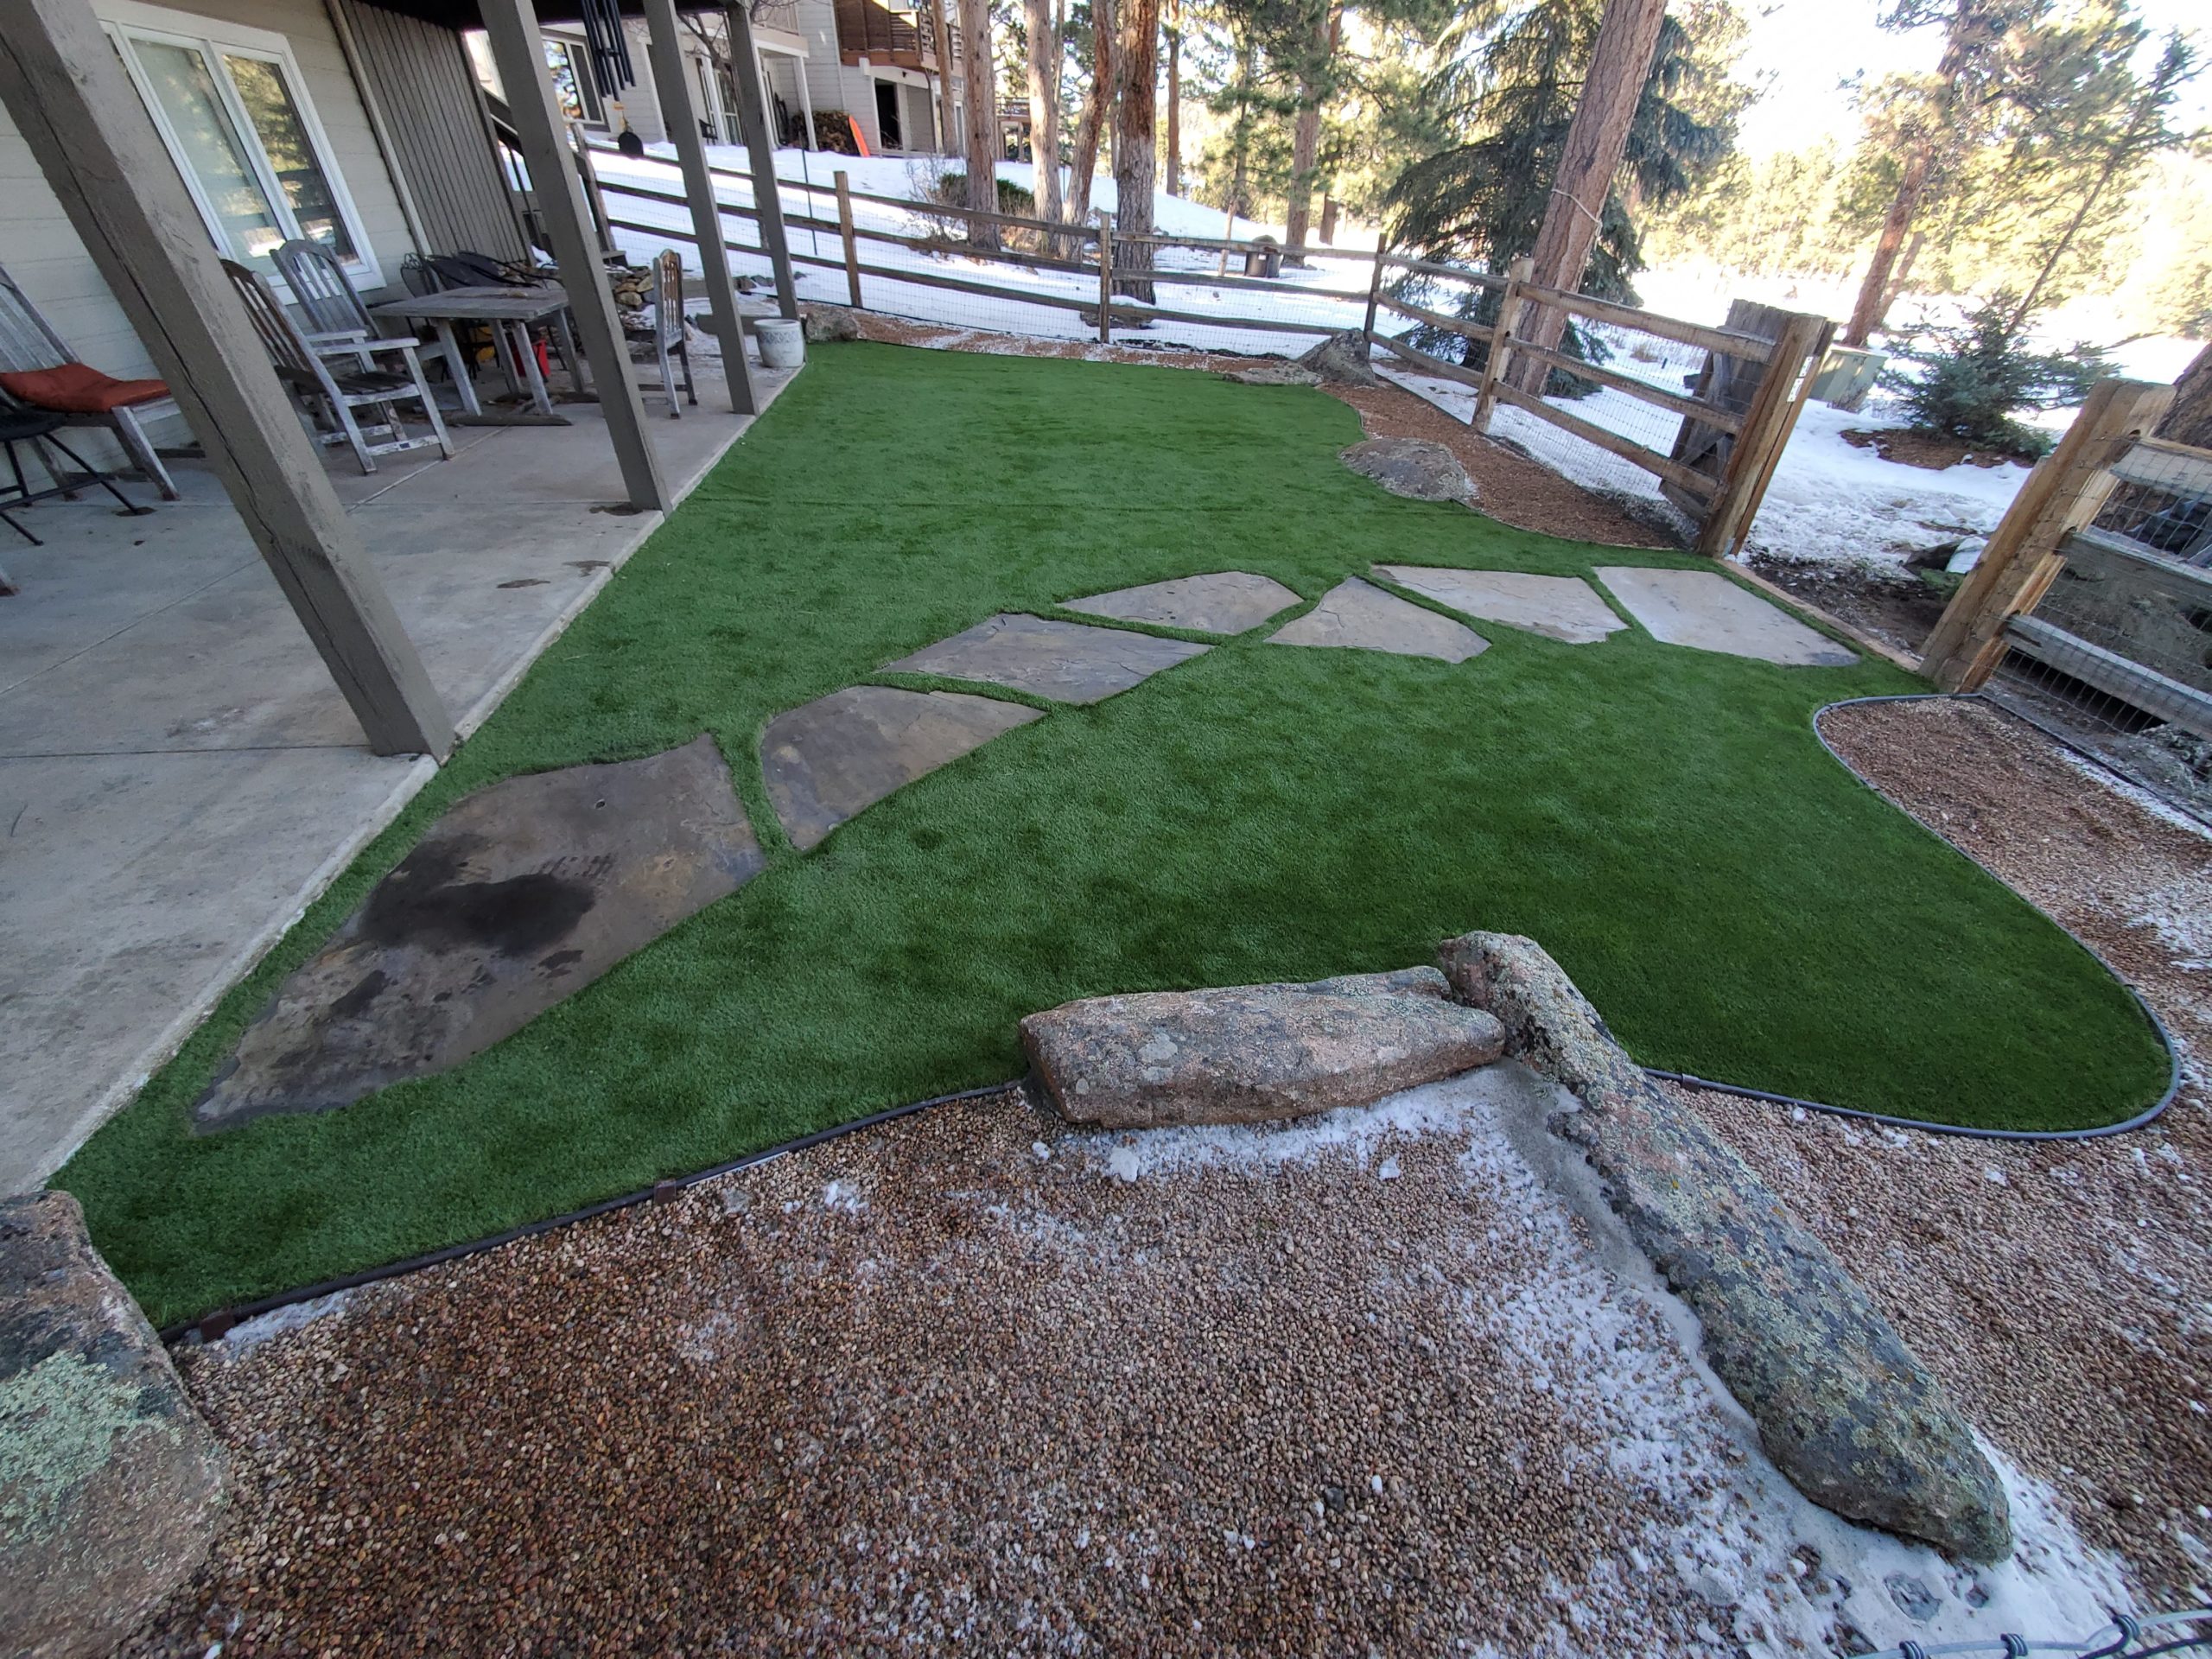 Stone walkway surrounded by grass, near walk-out basement